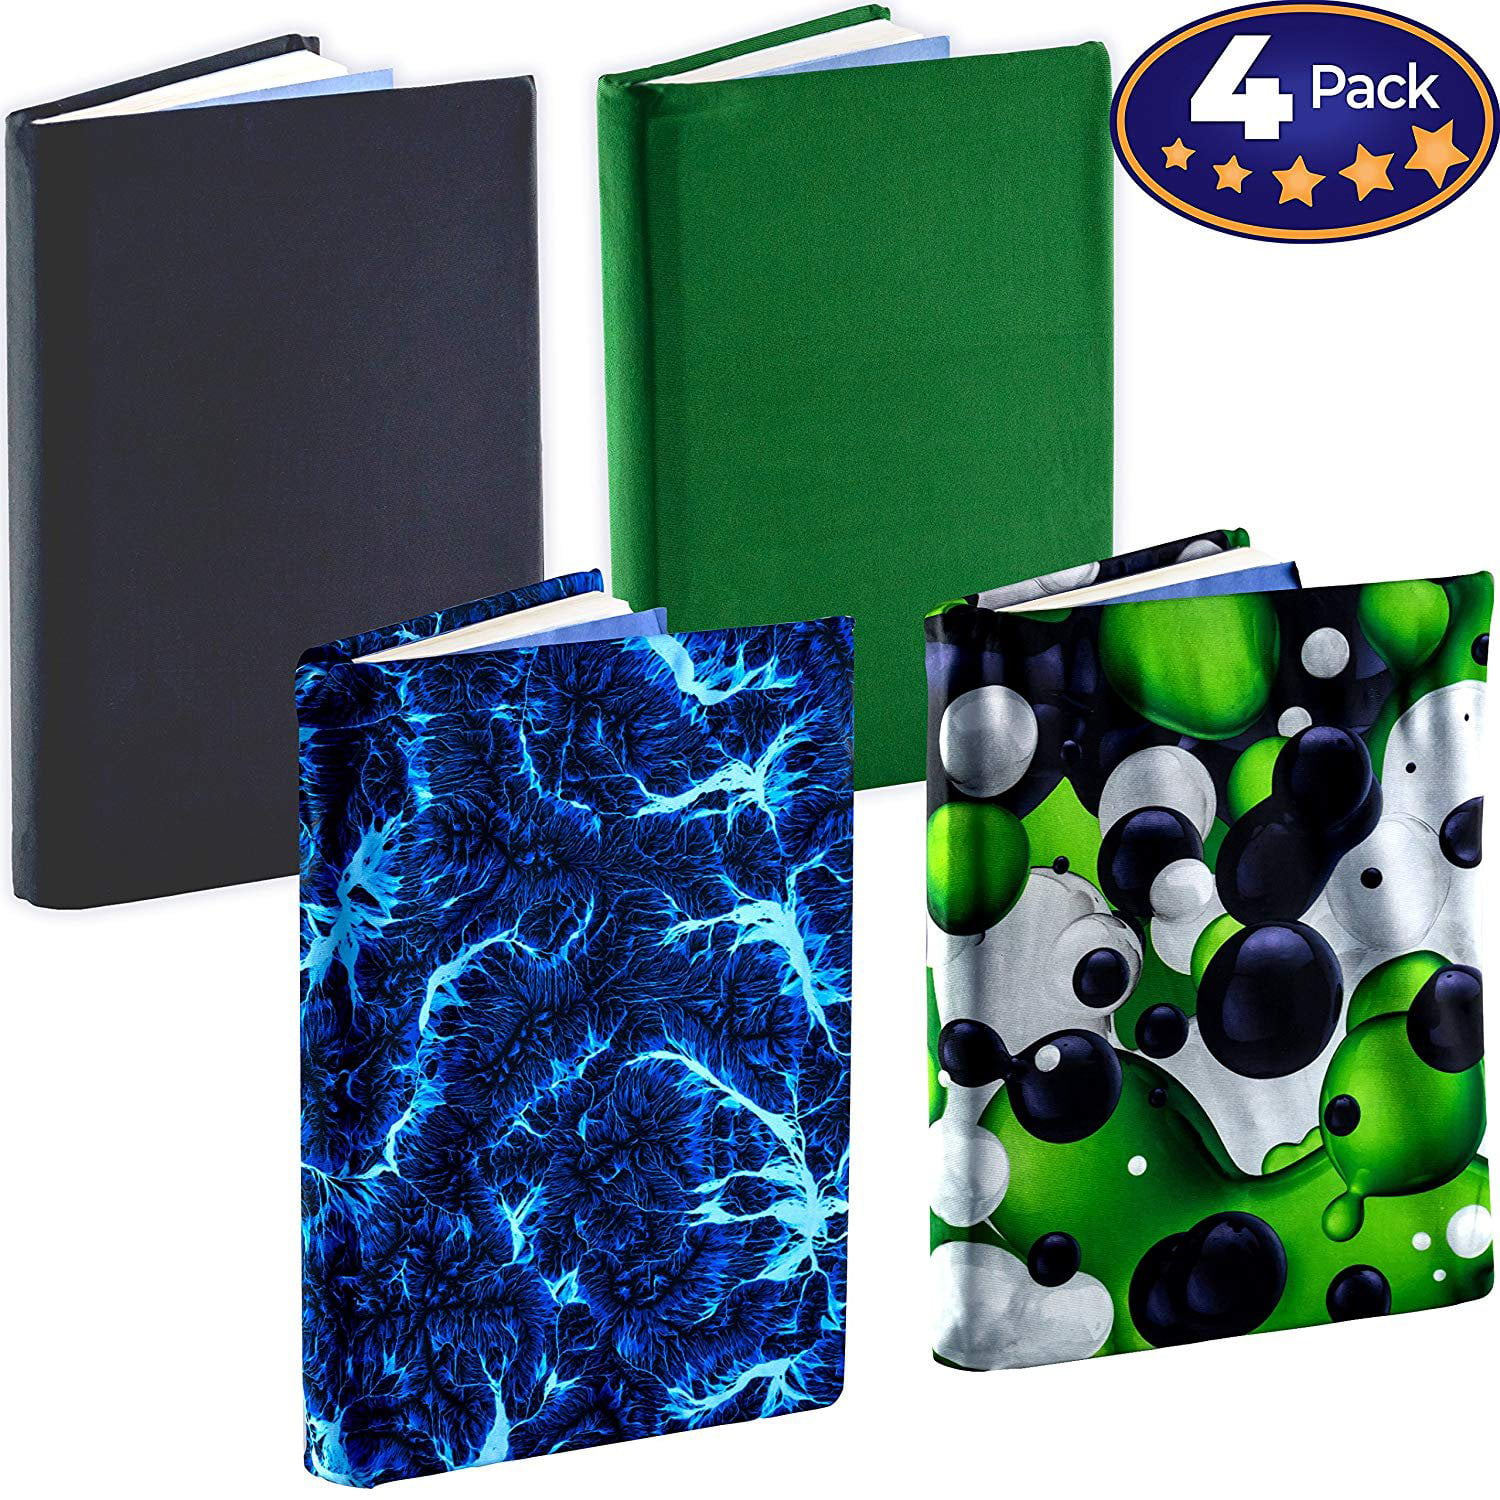 Stretchable Jumbo Book Covers Fits Hardcover Textbooks Up to 9.5 X 14,2 Pack,Durable Book Protector,Washable and Reusable,Office Supplies,Extras Index Tab 100pcs Dark Blue, 2 Pack 